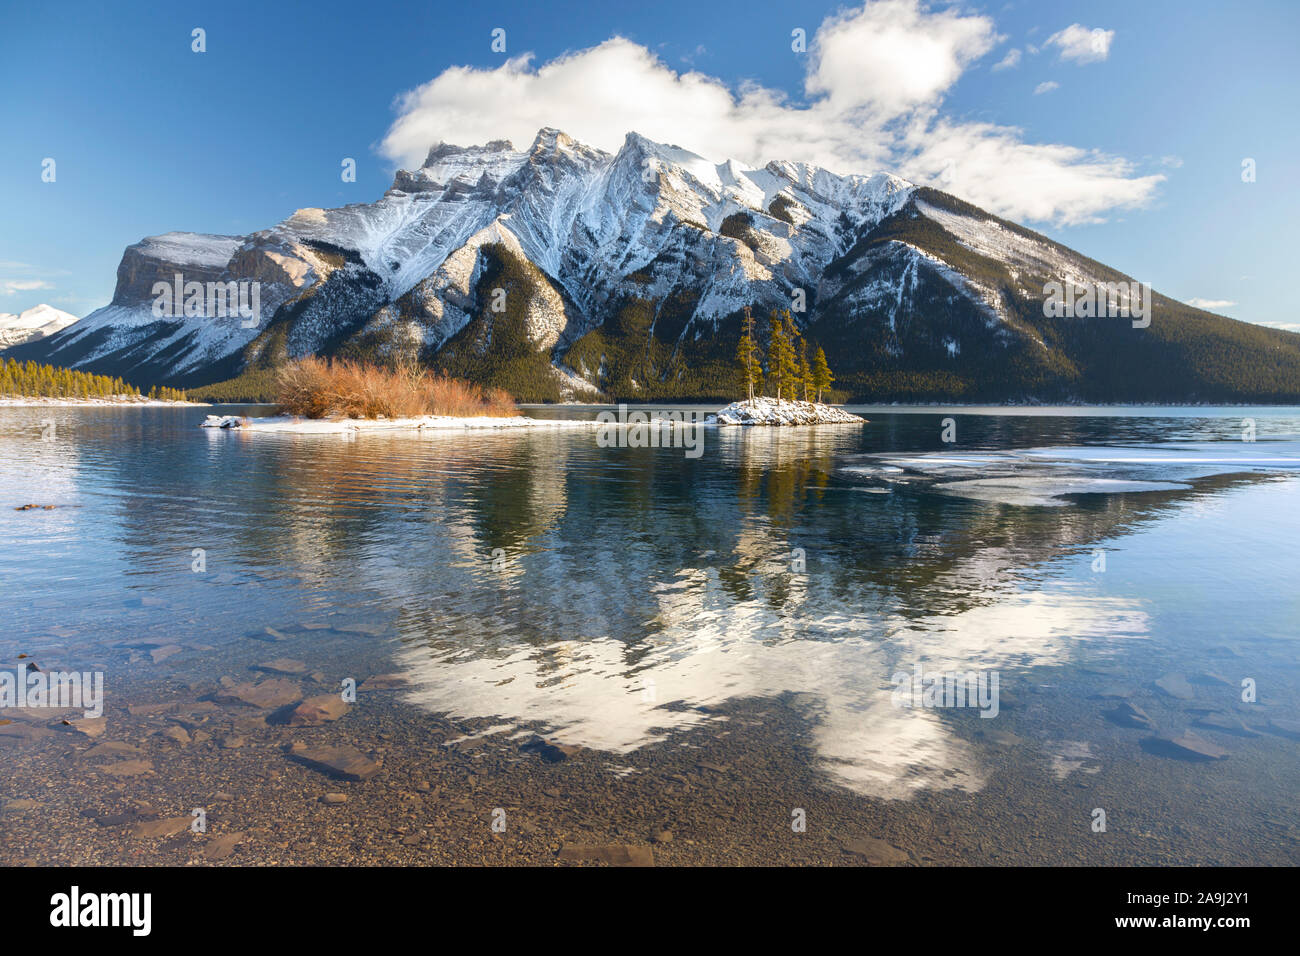 Snowcapped Mountain Peaks Landscape with Low Cloud Reflected in Calm Water. Beautiful Lake Minnewanka, Banff National Park, Alberta, Canadian Rockies Stock Photo